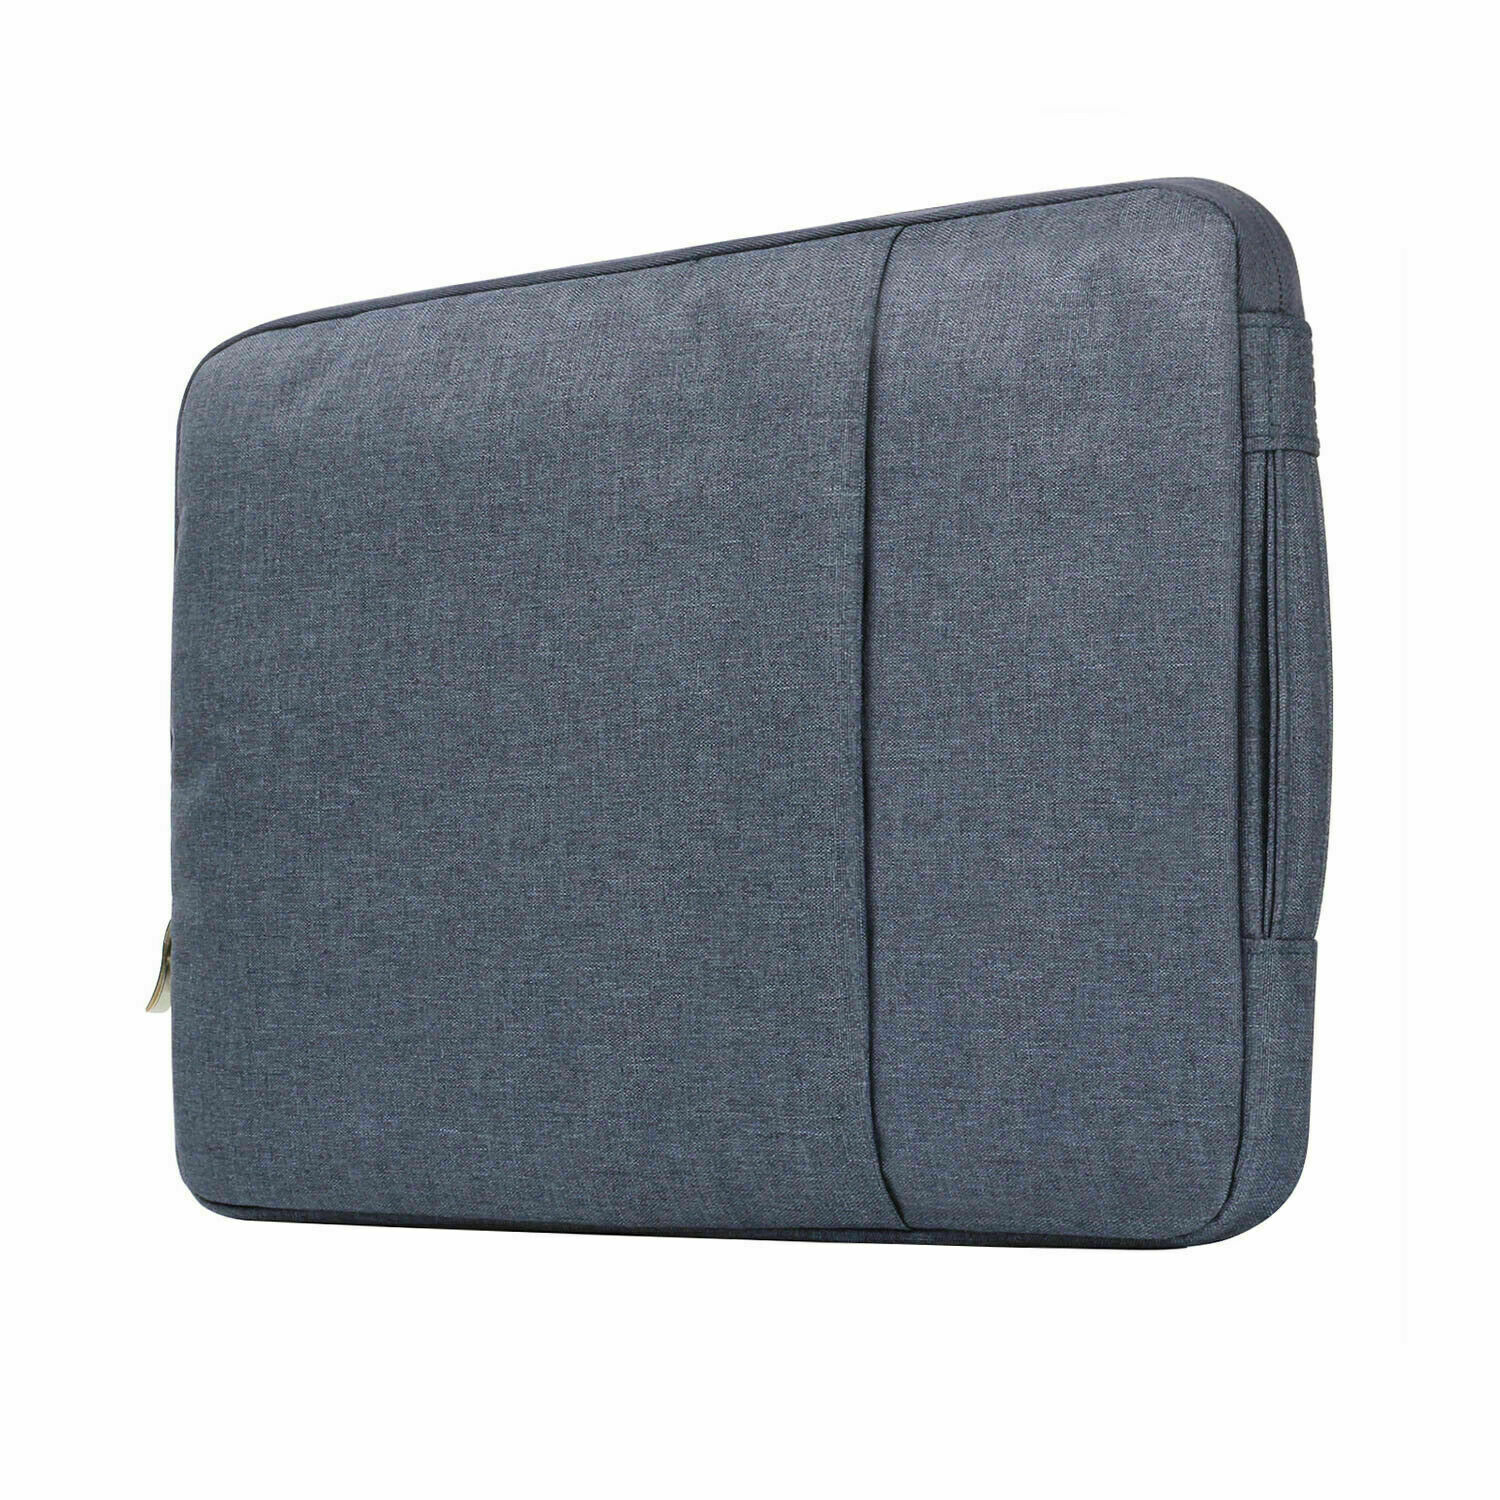 Laptop Sleeve Case Bag For MacBook Air Pro 11.6 13 15 A1398 Lenovo HP Apple DELL